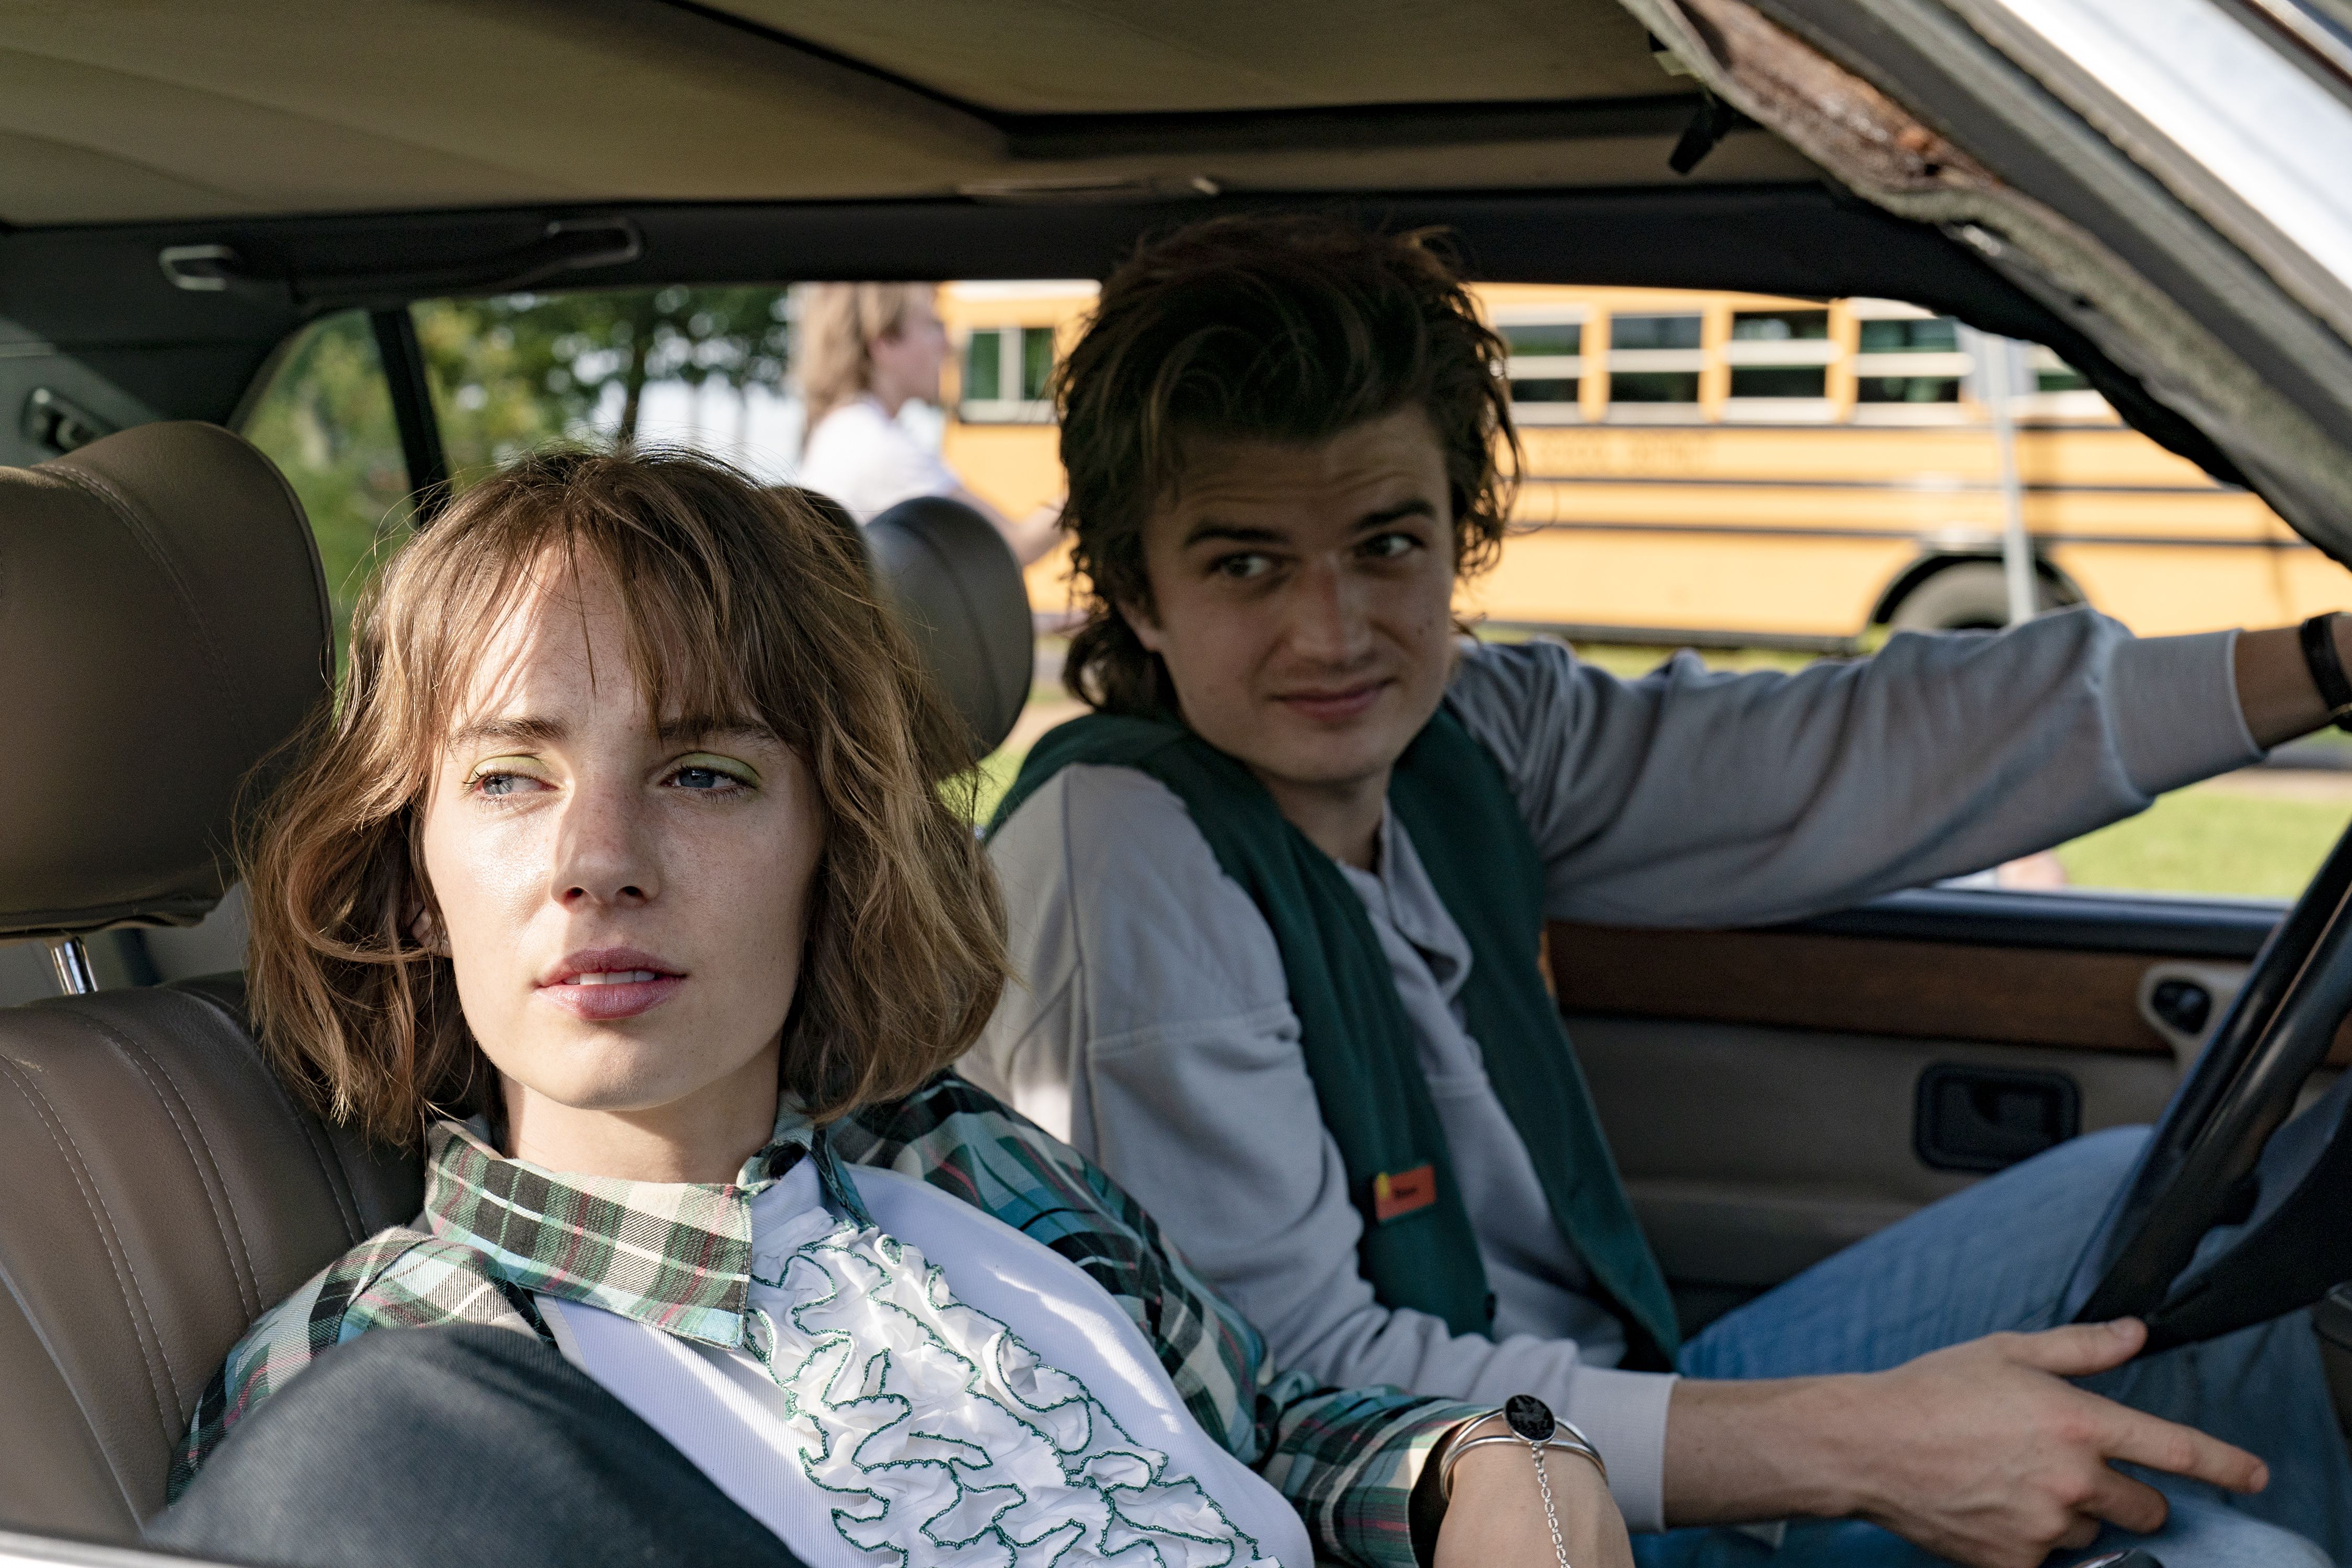 Stranger Things: Who will star in the season 5?